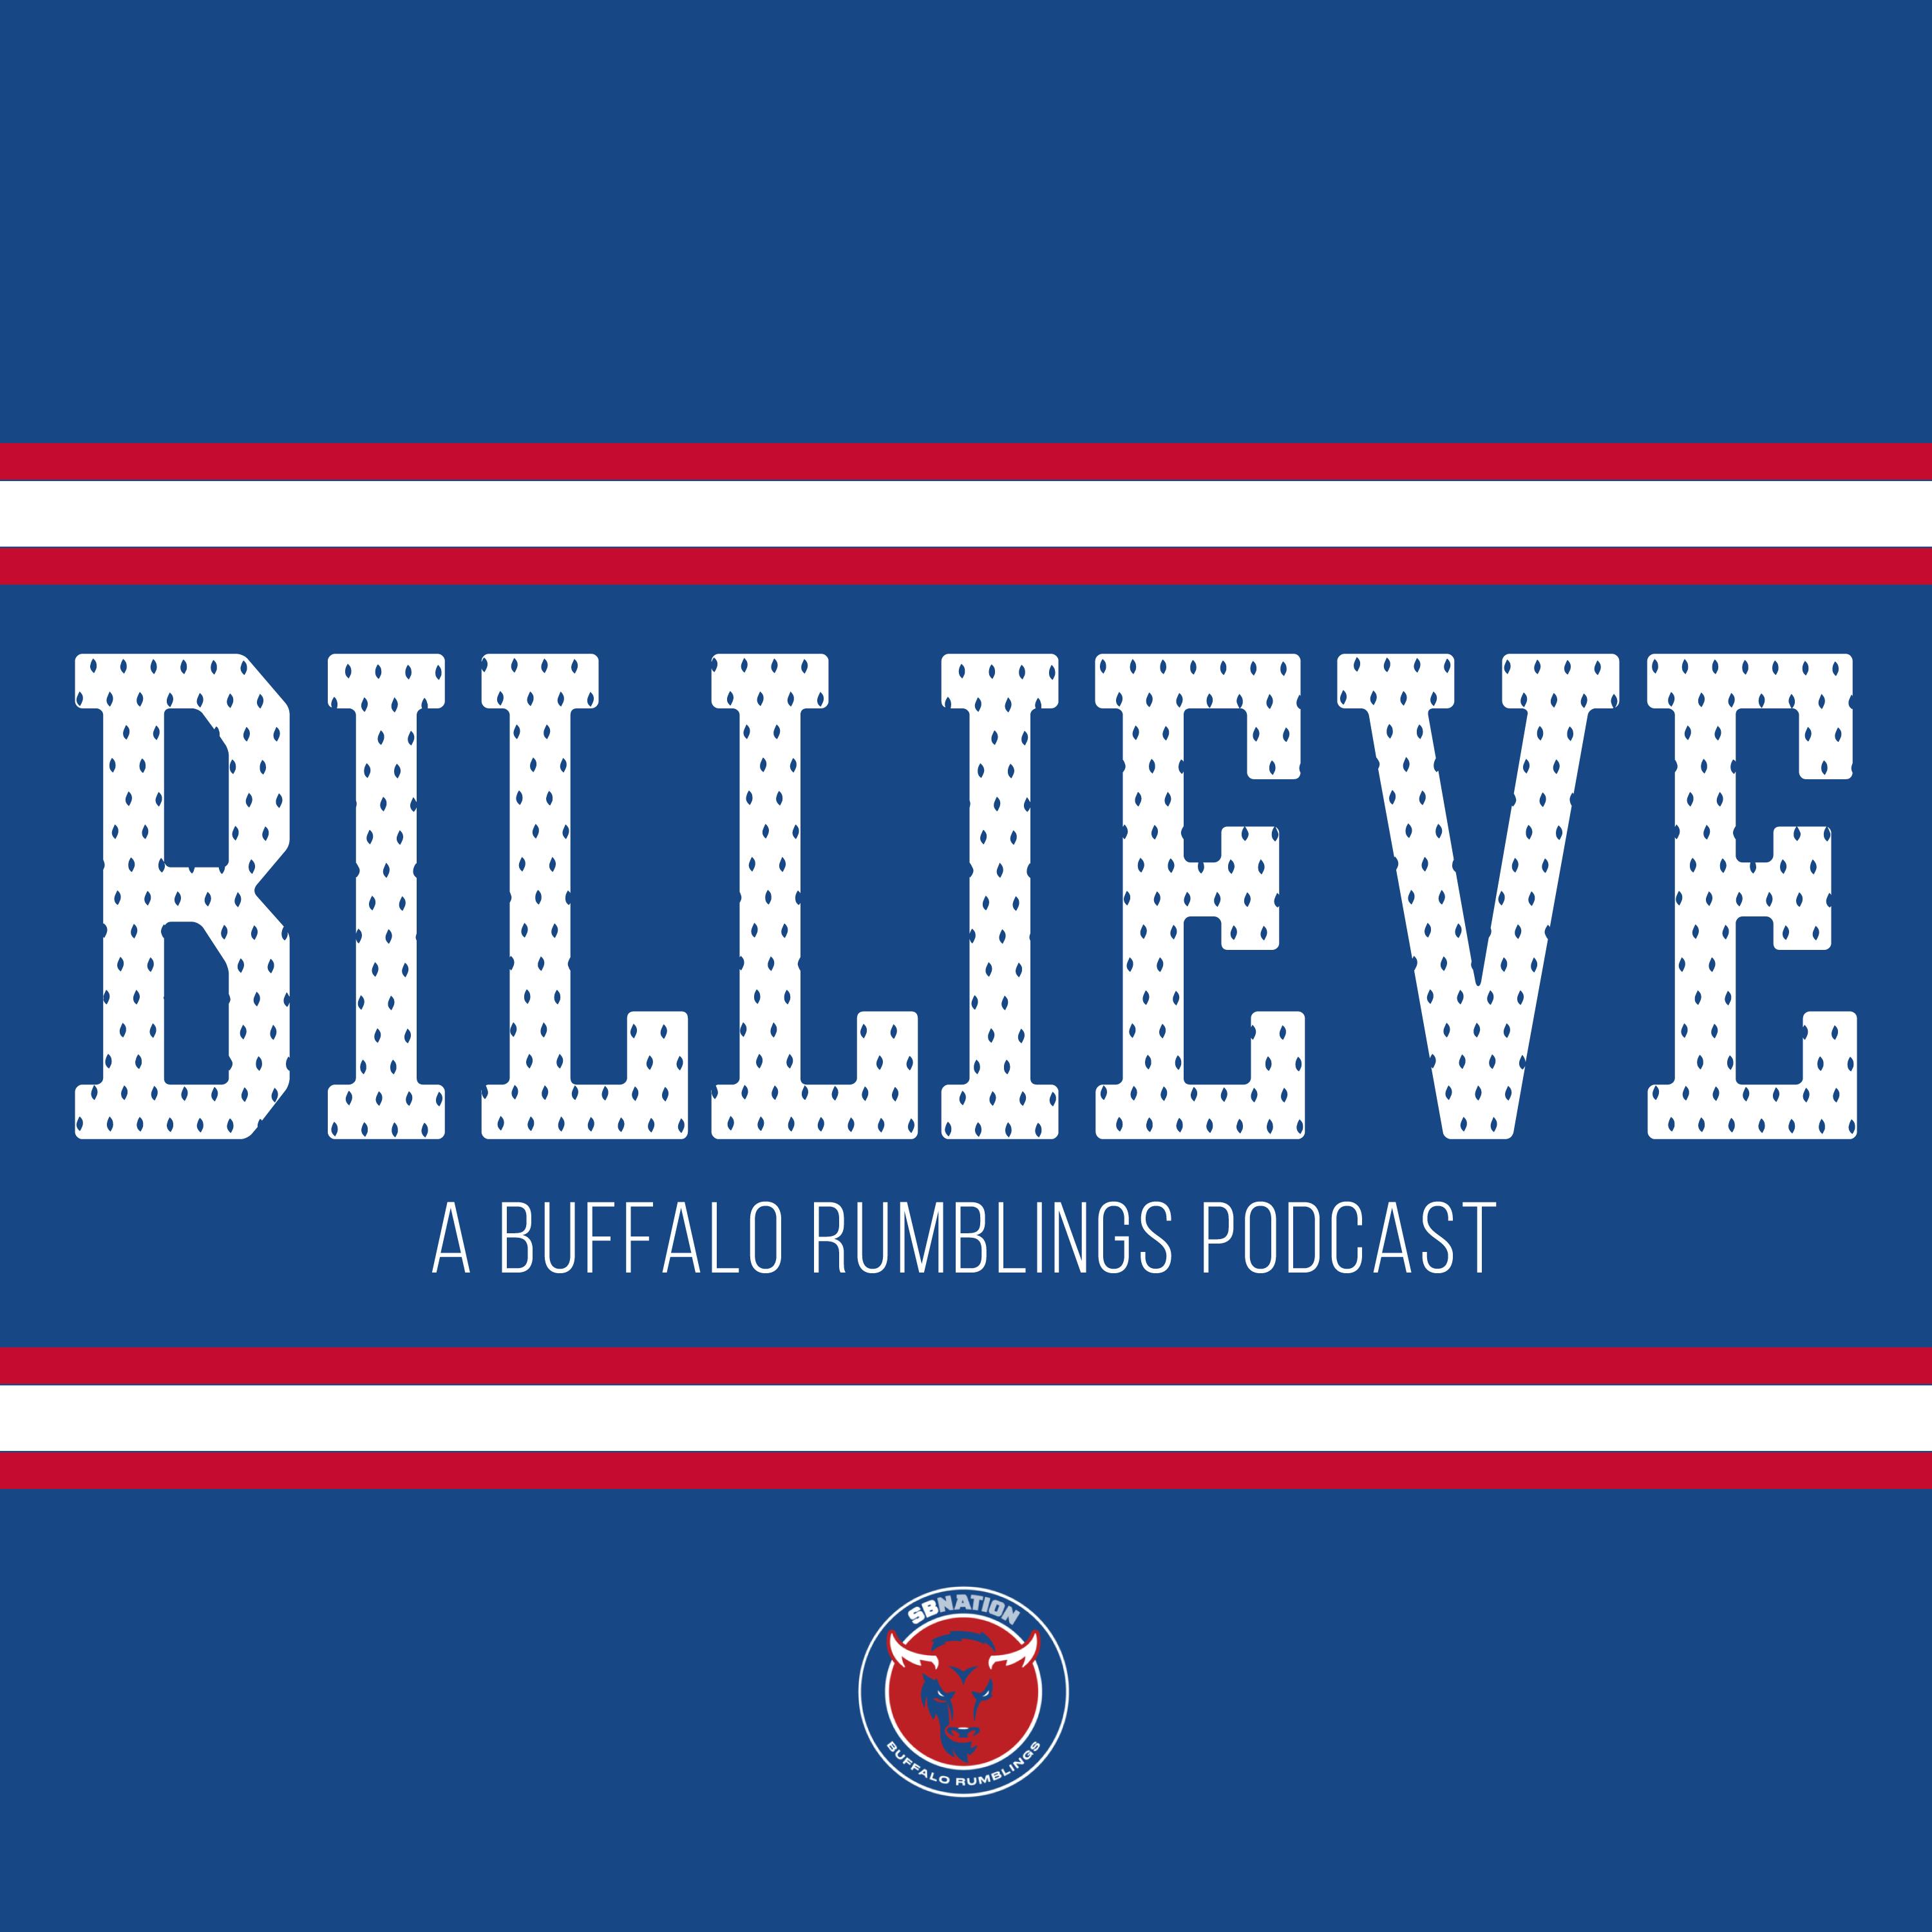 Billieve: Bills Can't Dethrone Pats in Playoff-Type Game